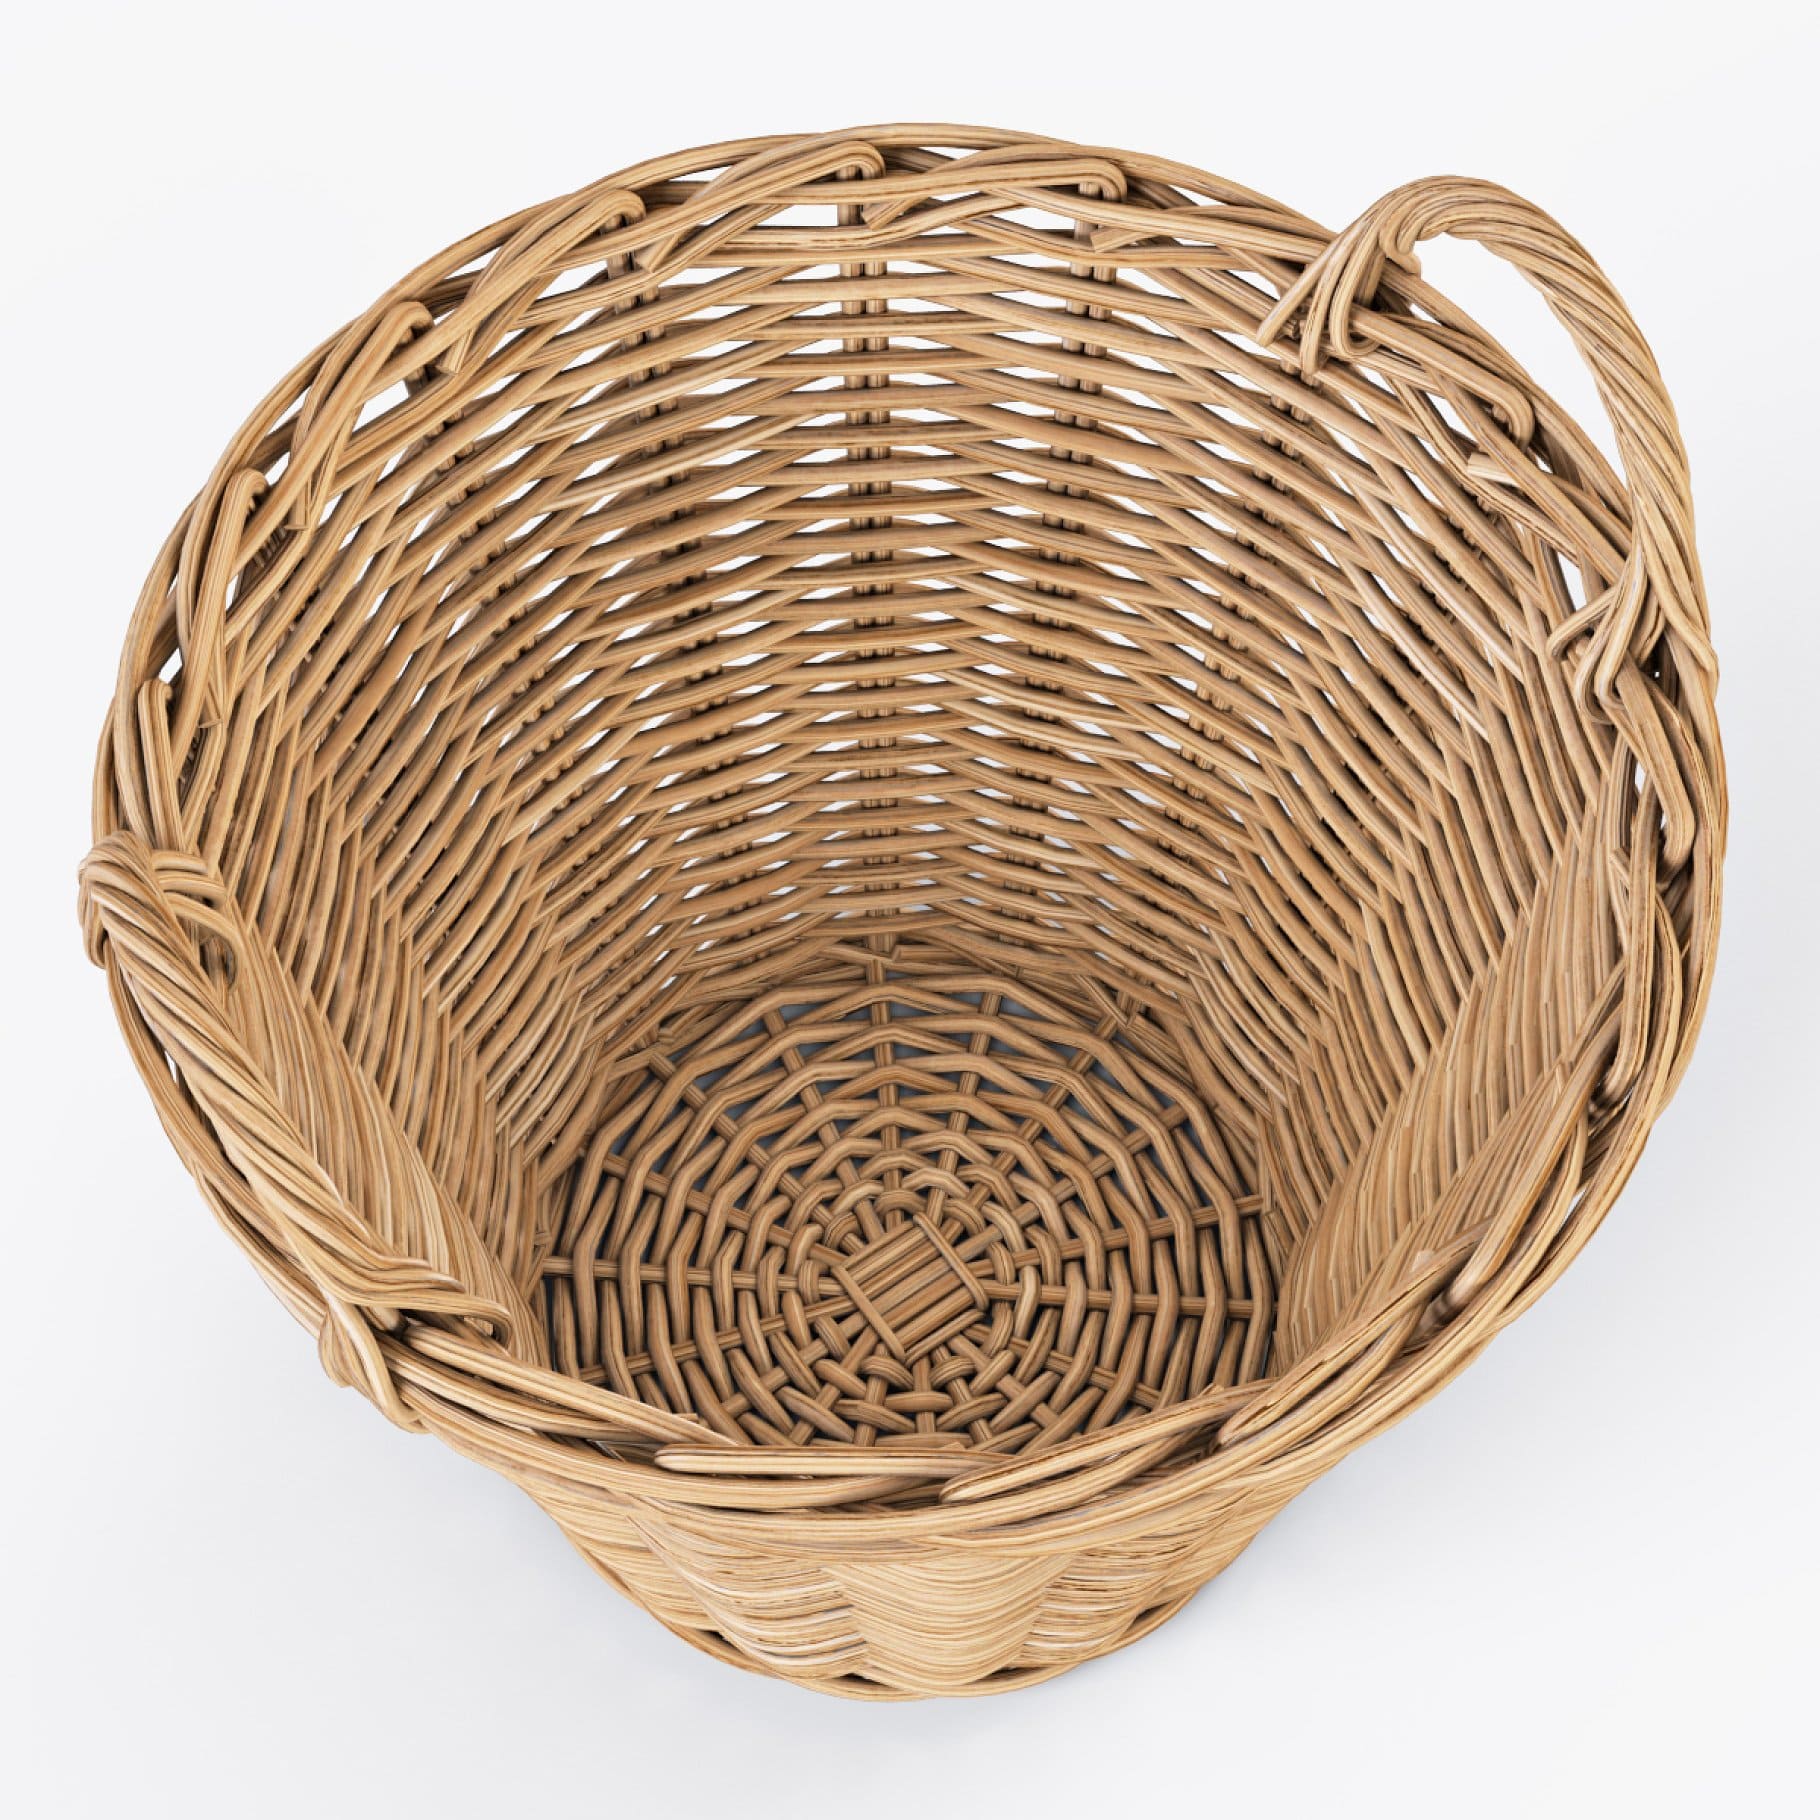 Lacquered wicker basket.